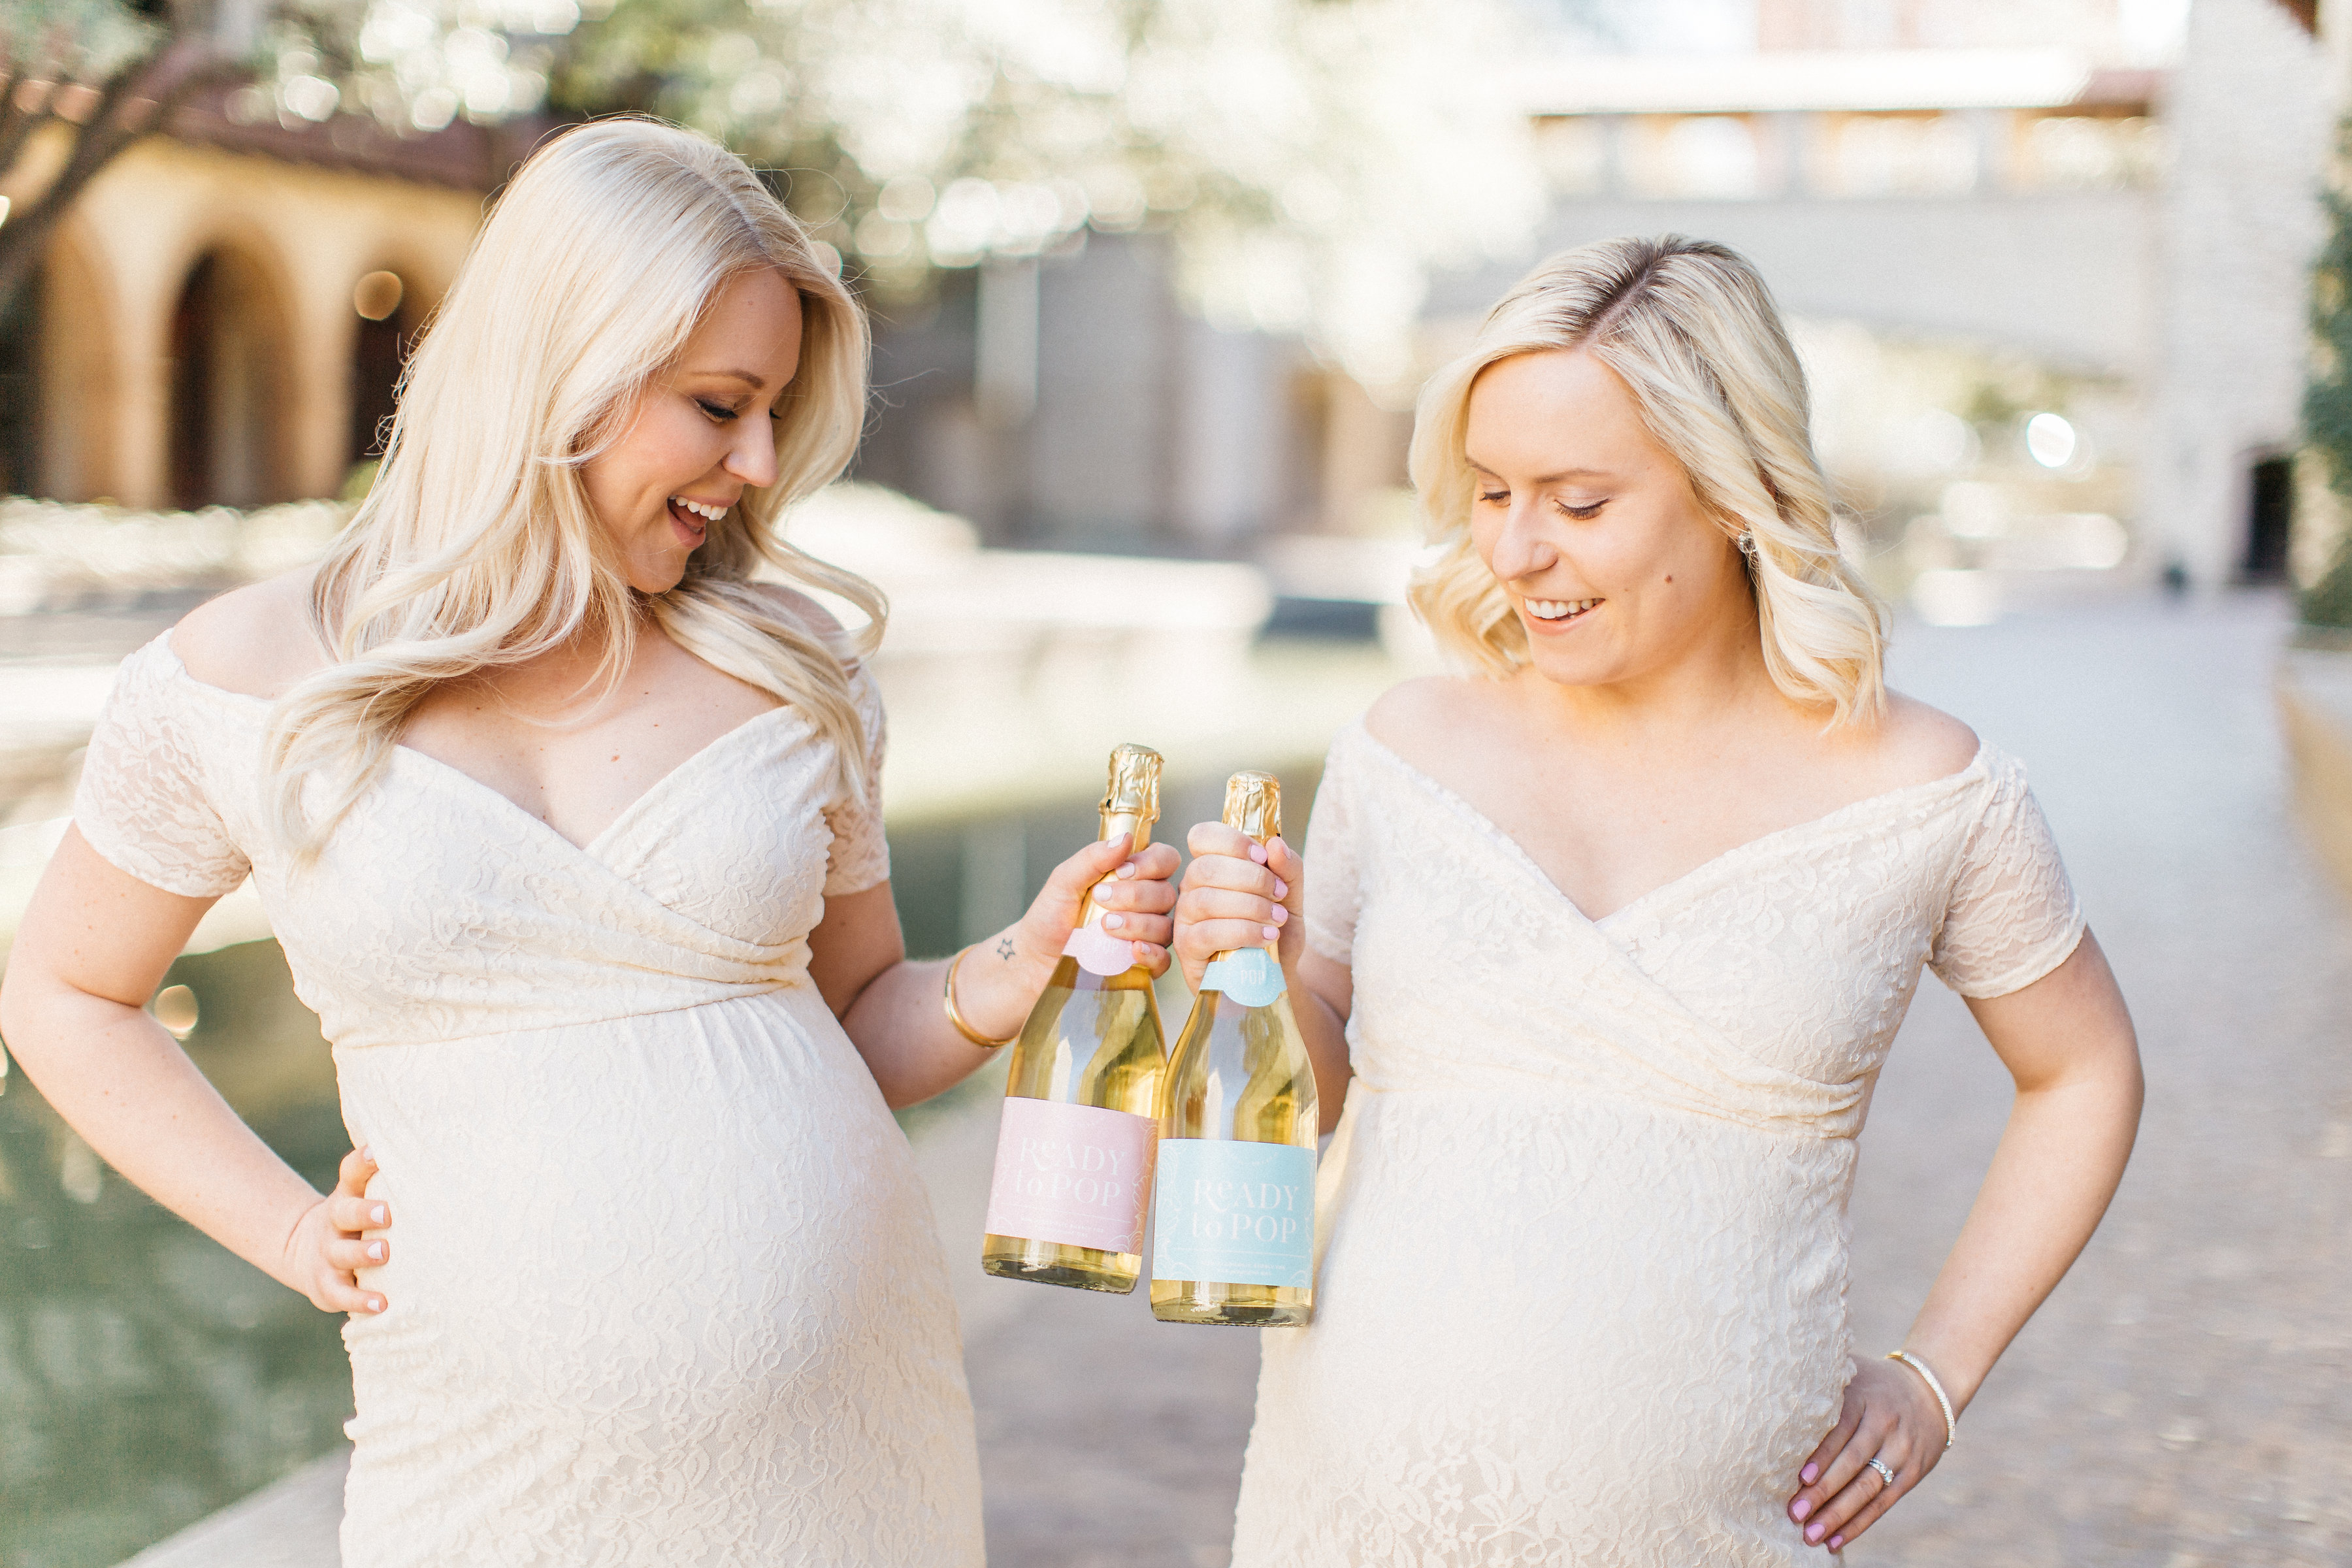 Celebrate Your Pregnancy With 'Ready To Pop' Non-Alcoholic